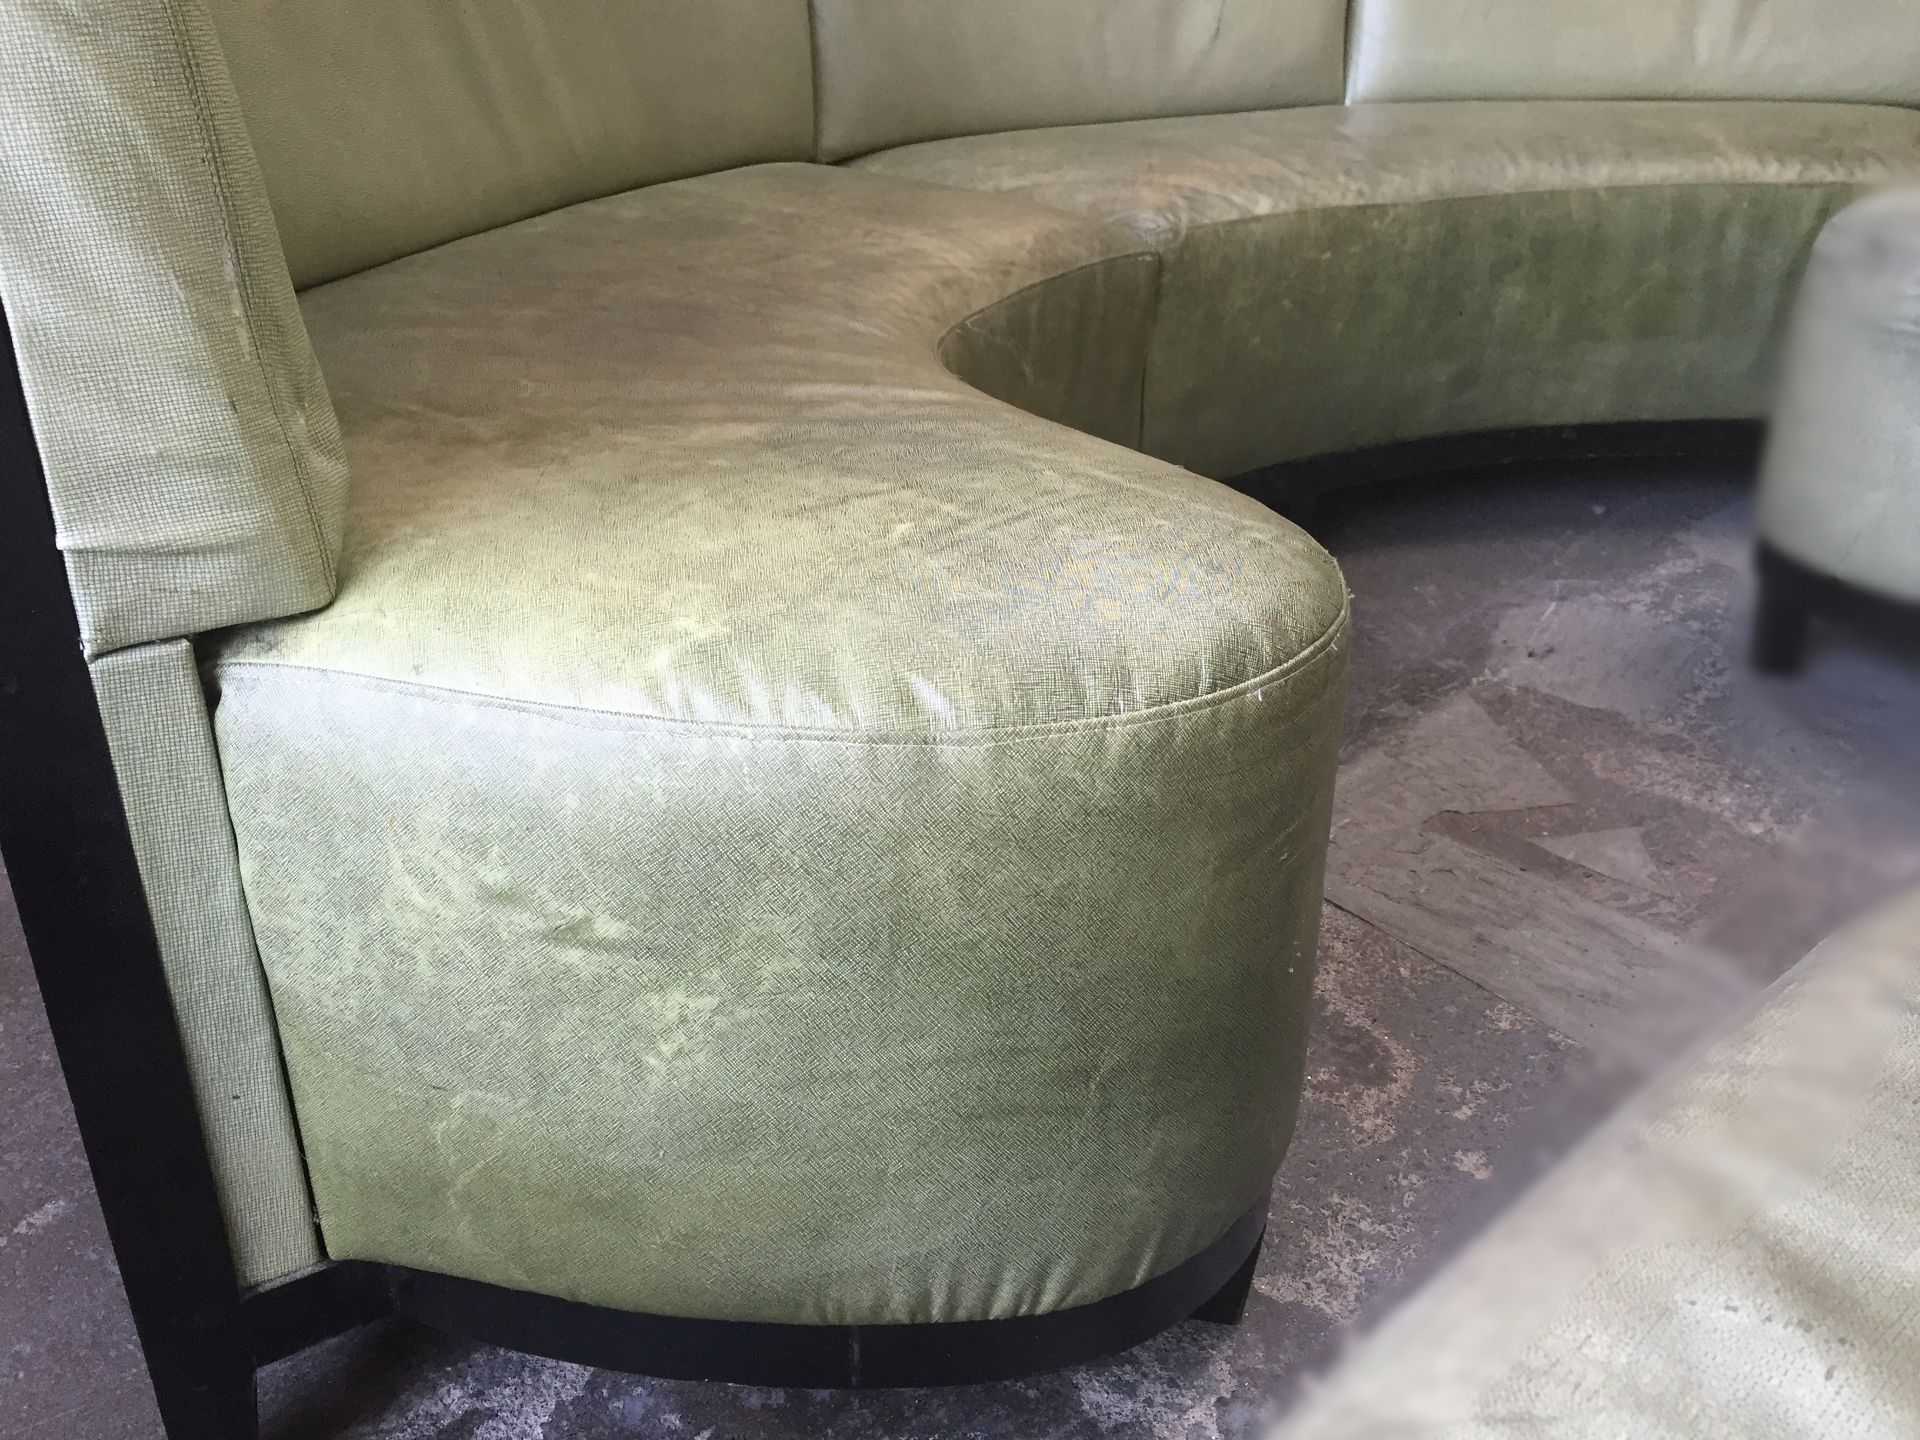 1 x Luxury Upholstered Curved Seating Area - Recently Removed From Nobu - Dimensions: W285 x D62cm x - Image 3 of 17